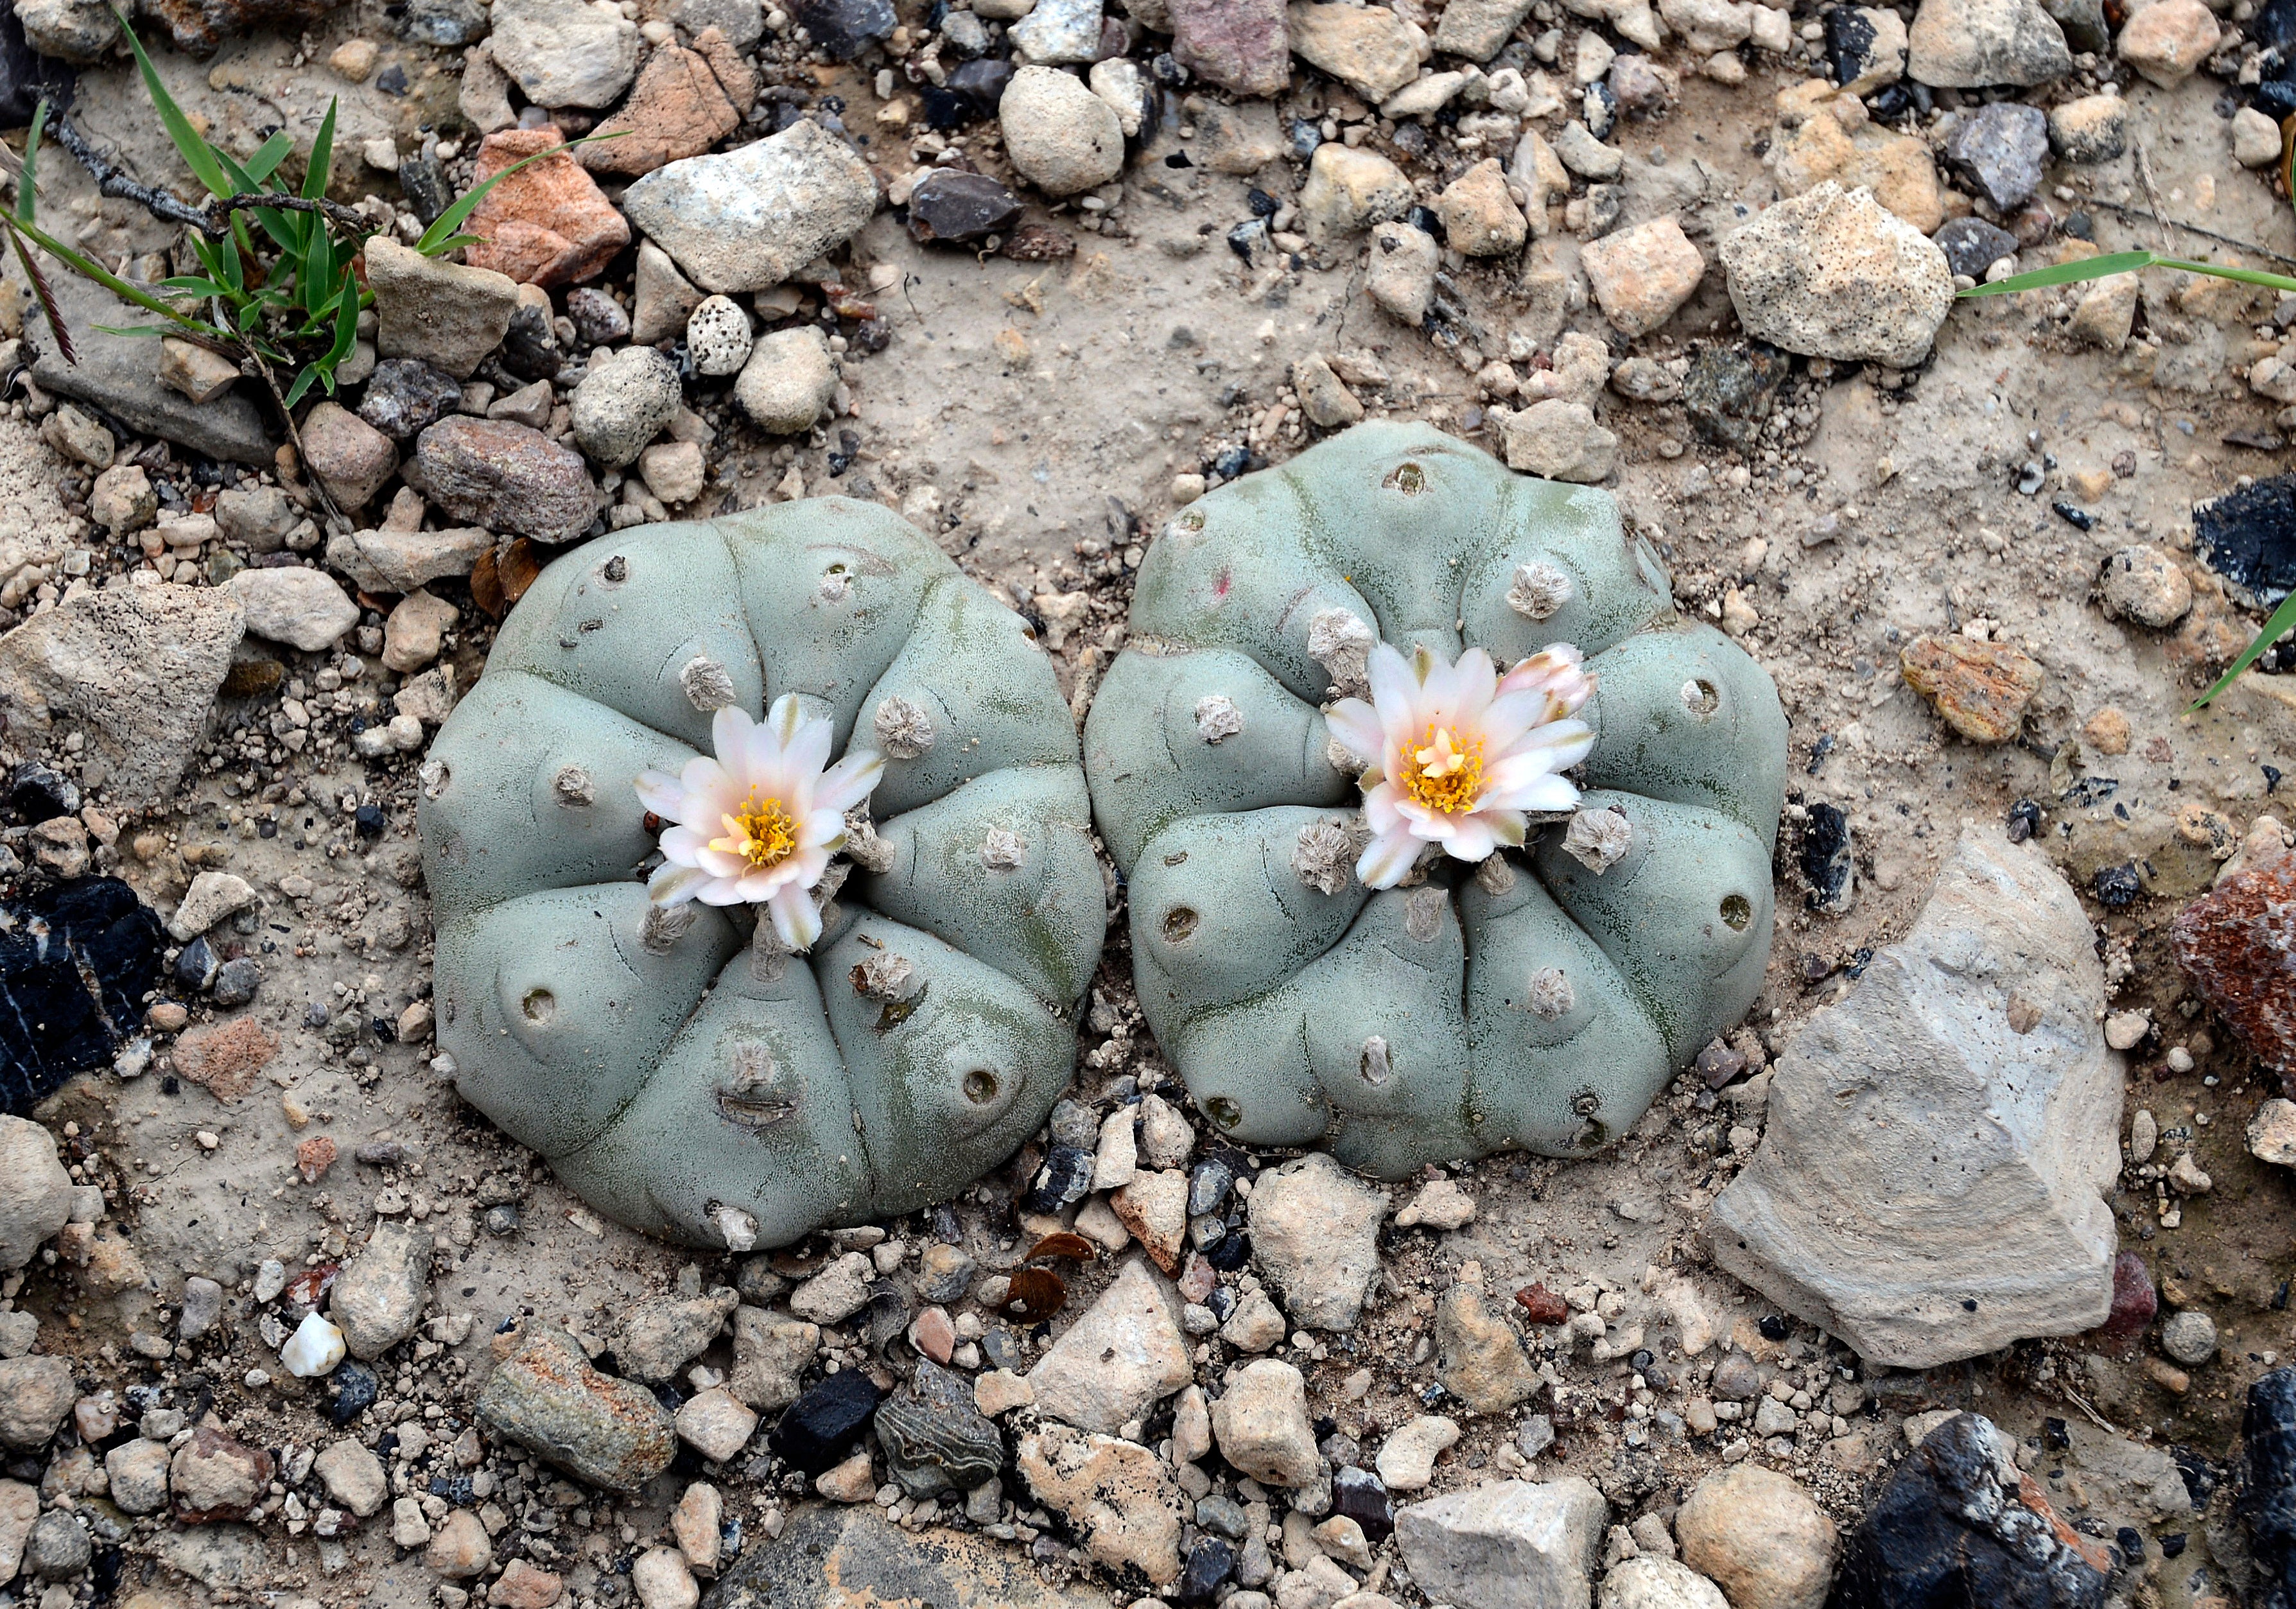 View of peyote cactus, which contains psychoactive properties such as mecaline, and has been used in indigenous communities for over 5,000 years.